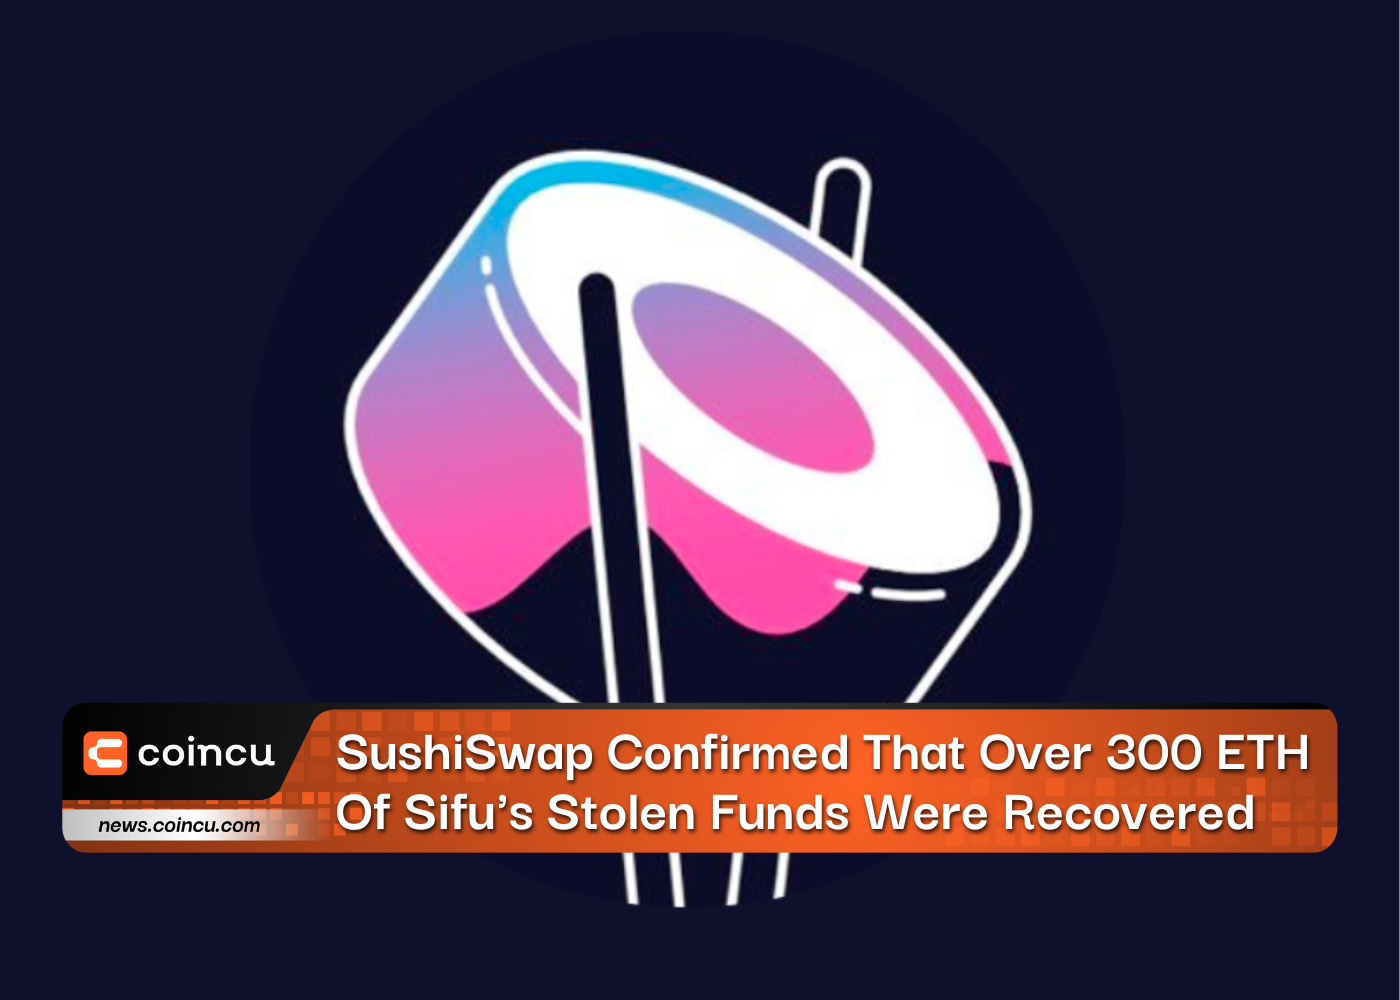 SushiSwap Confirmed That Over 300 ETH Of Sifu's Stolen Funds Were Recovered